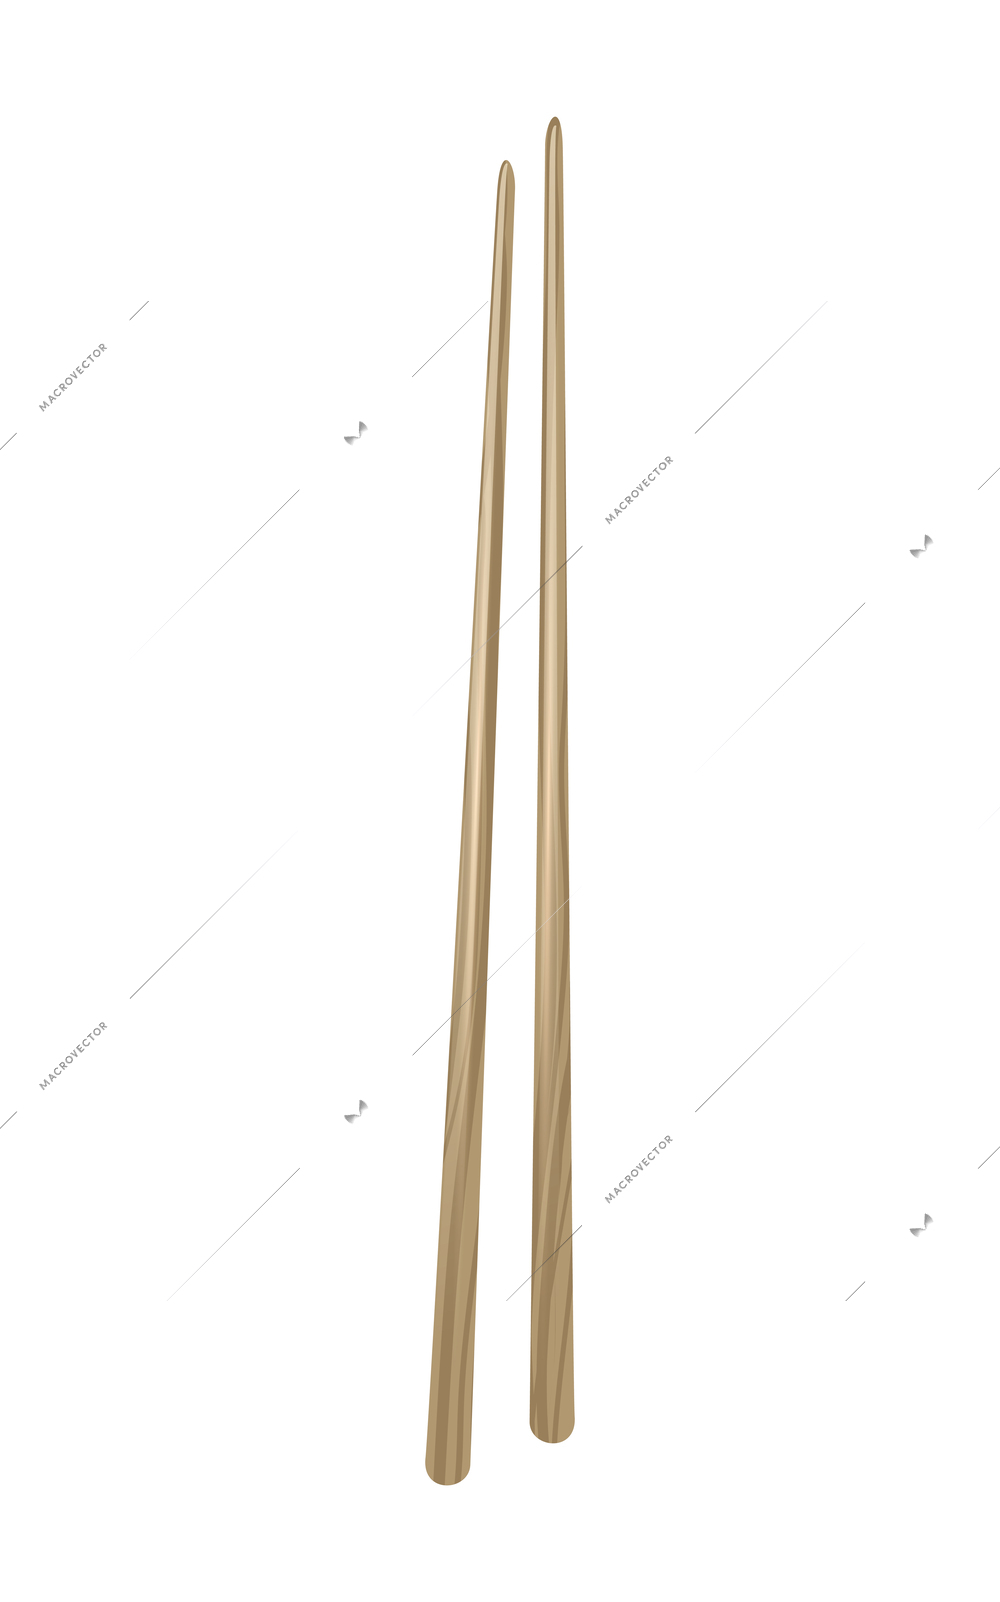 Pair of wooden chopsticks on white background realistic vector illustration